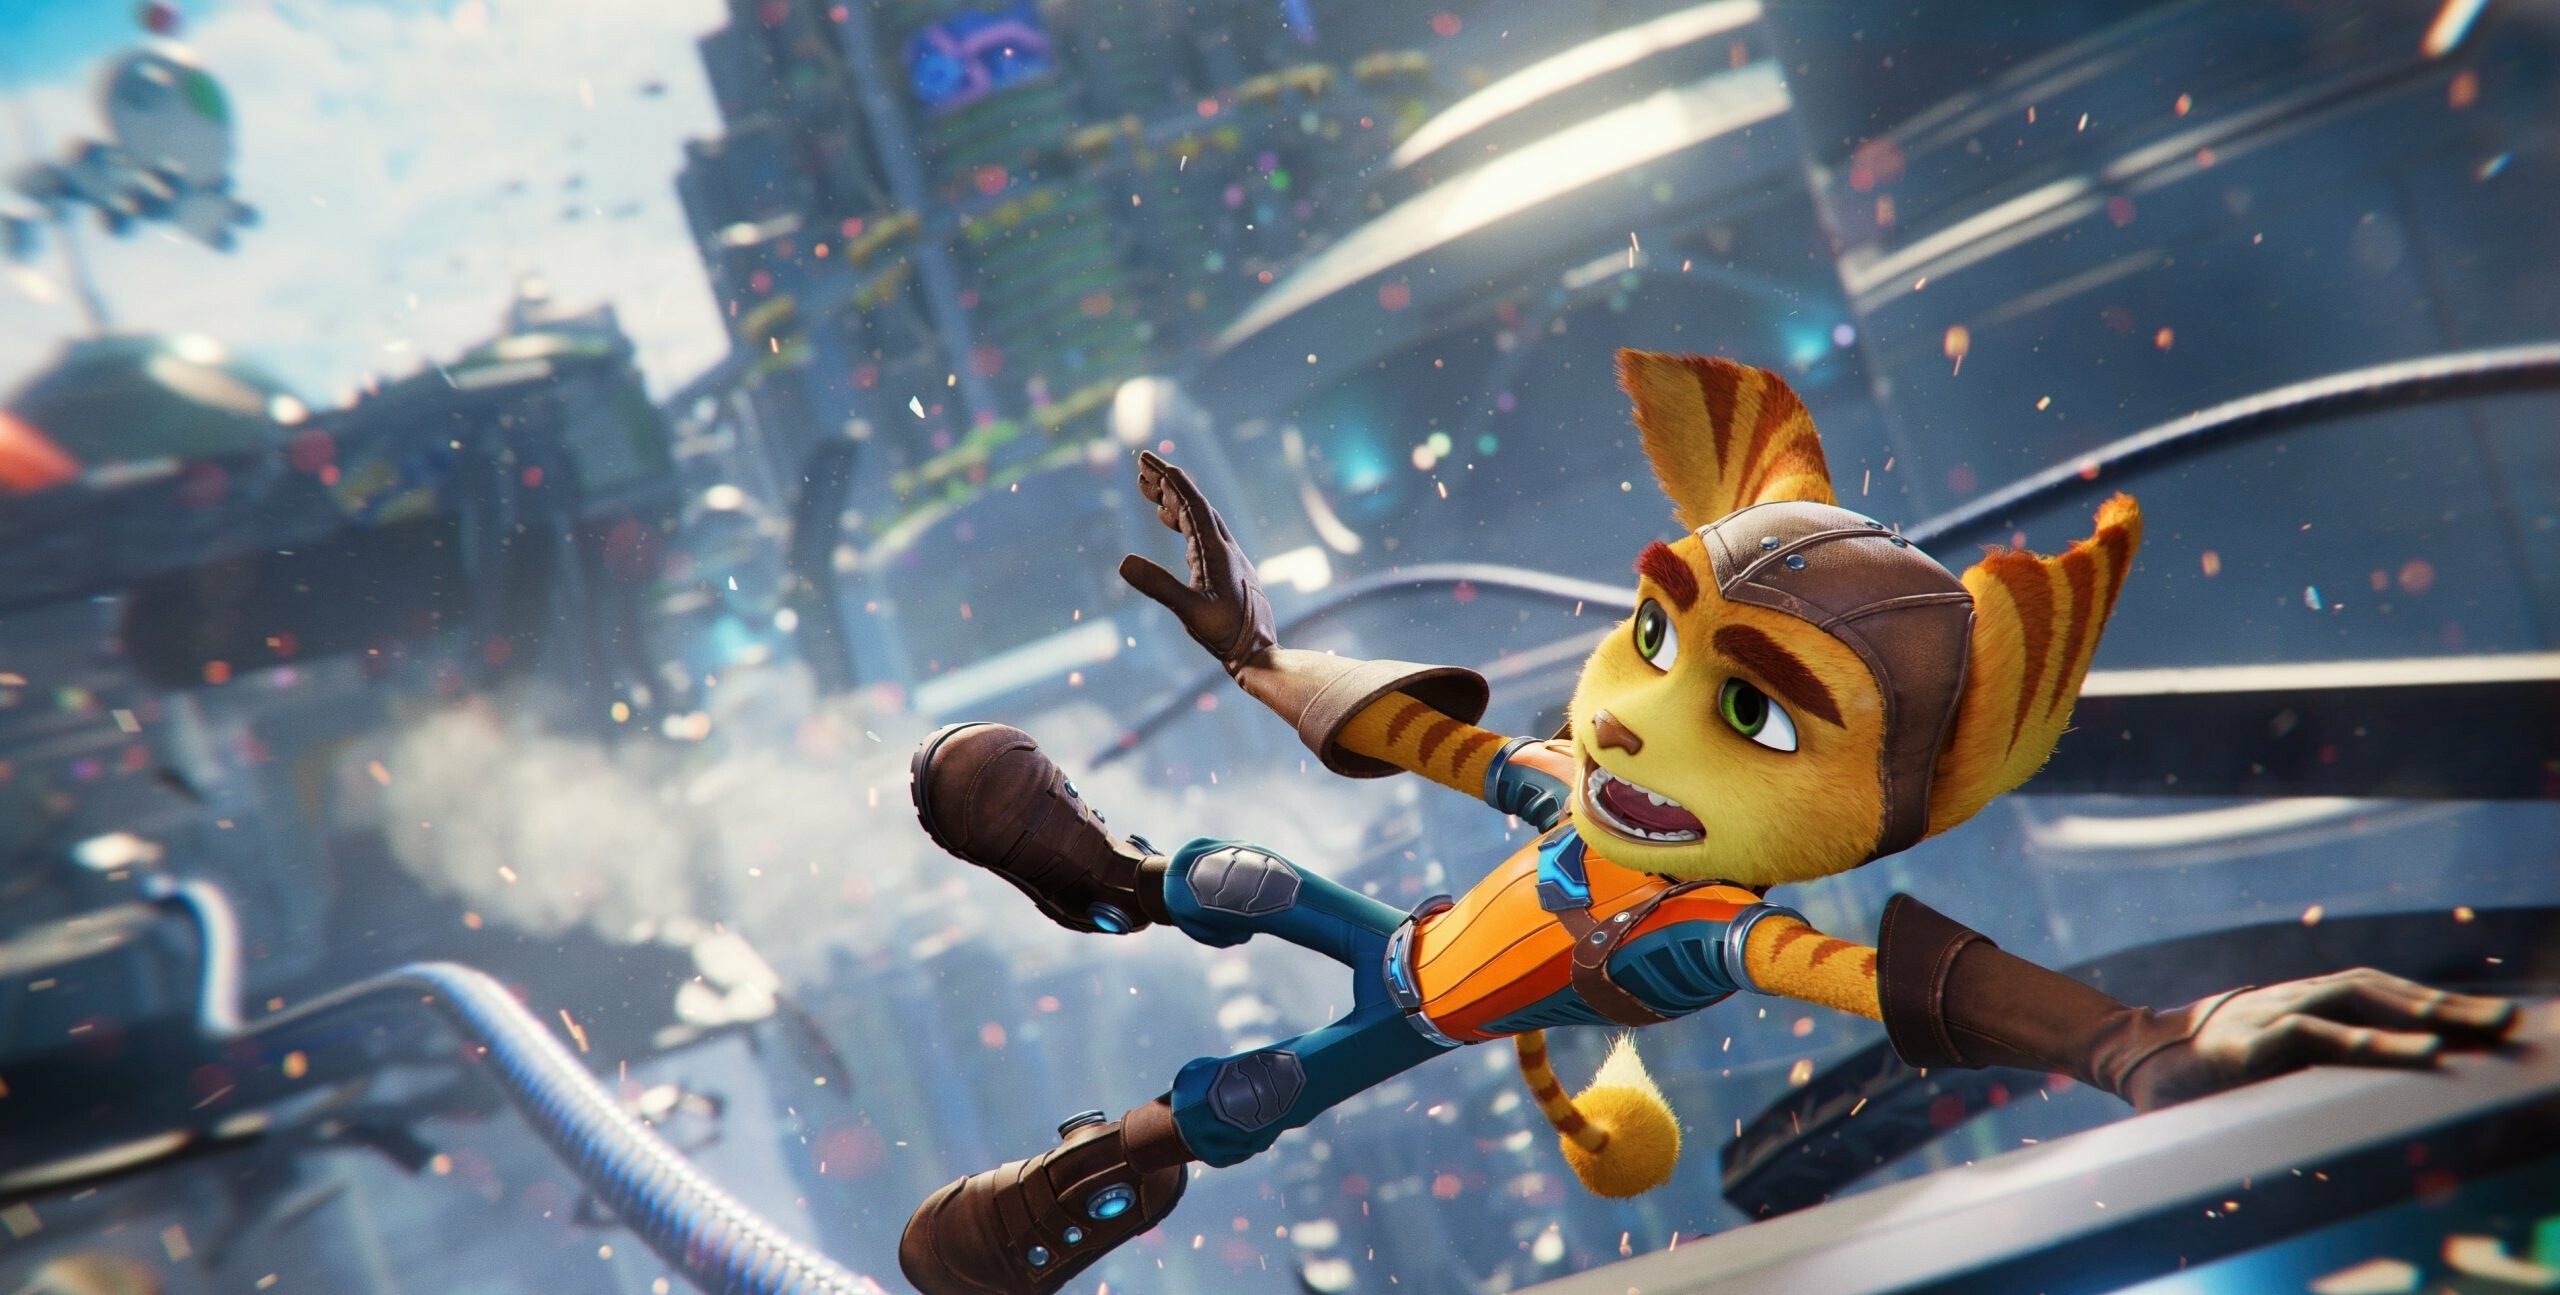 Ratchet and Clank: Rift Apart: An anthropomorphic character known as a Lombax, His first appearance was on Planet Veldin. 2560x1300 HD Wallpaper.